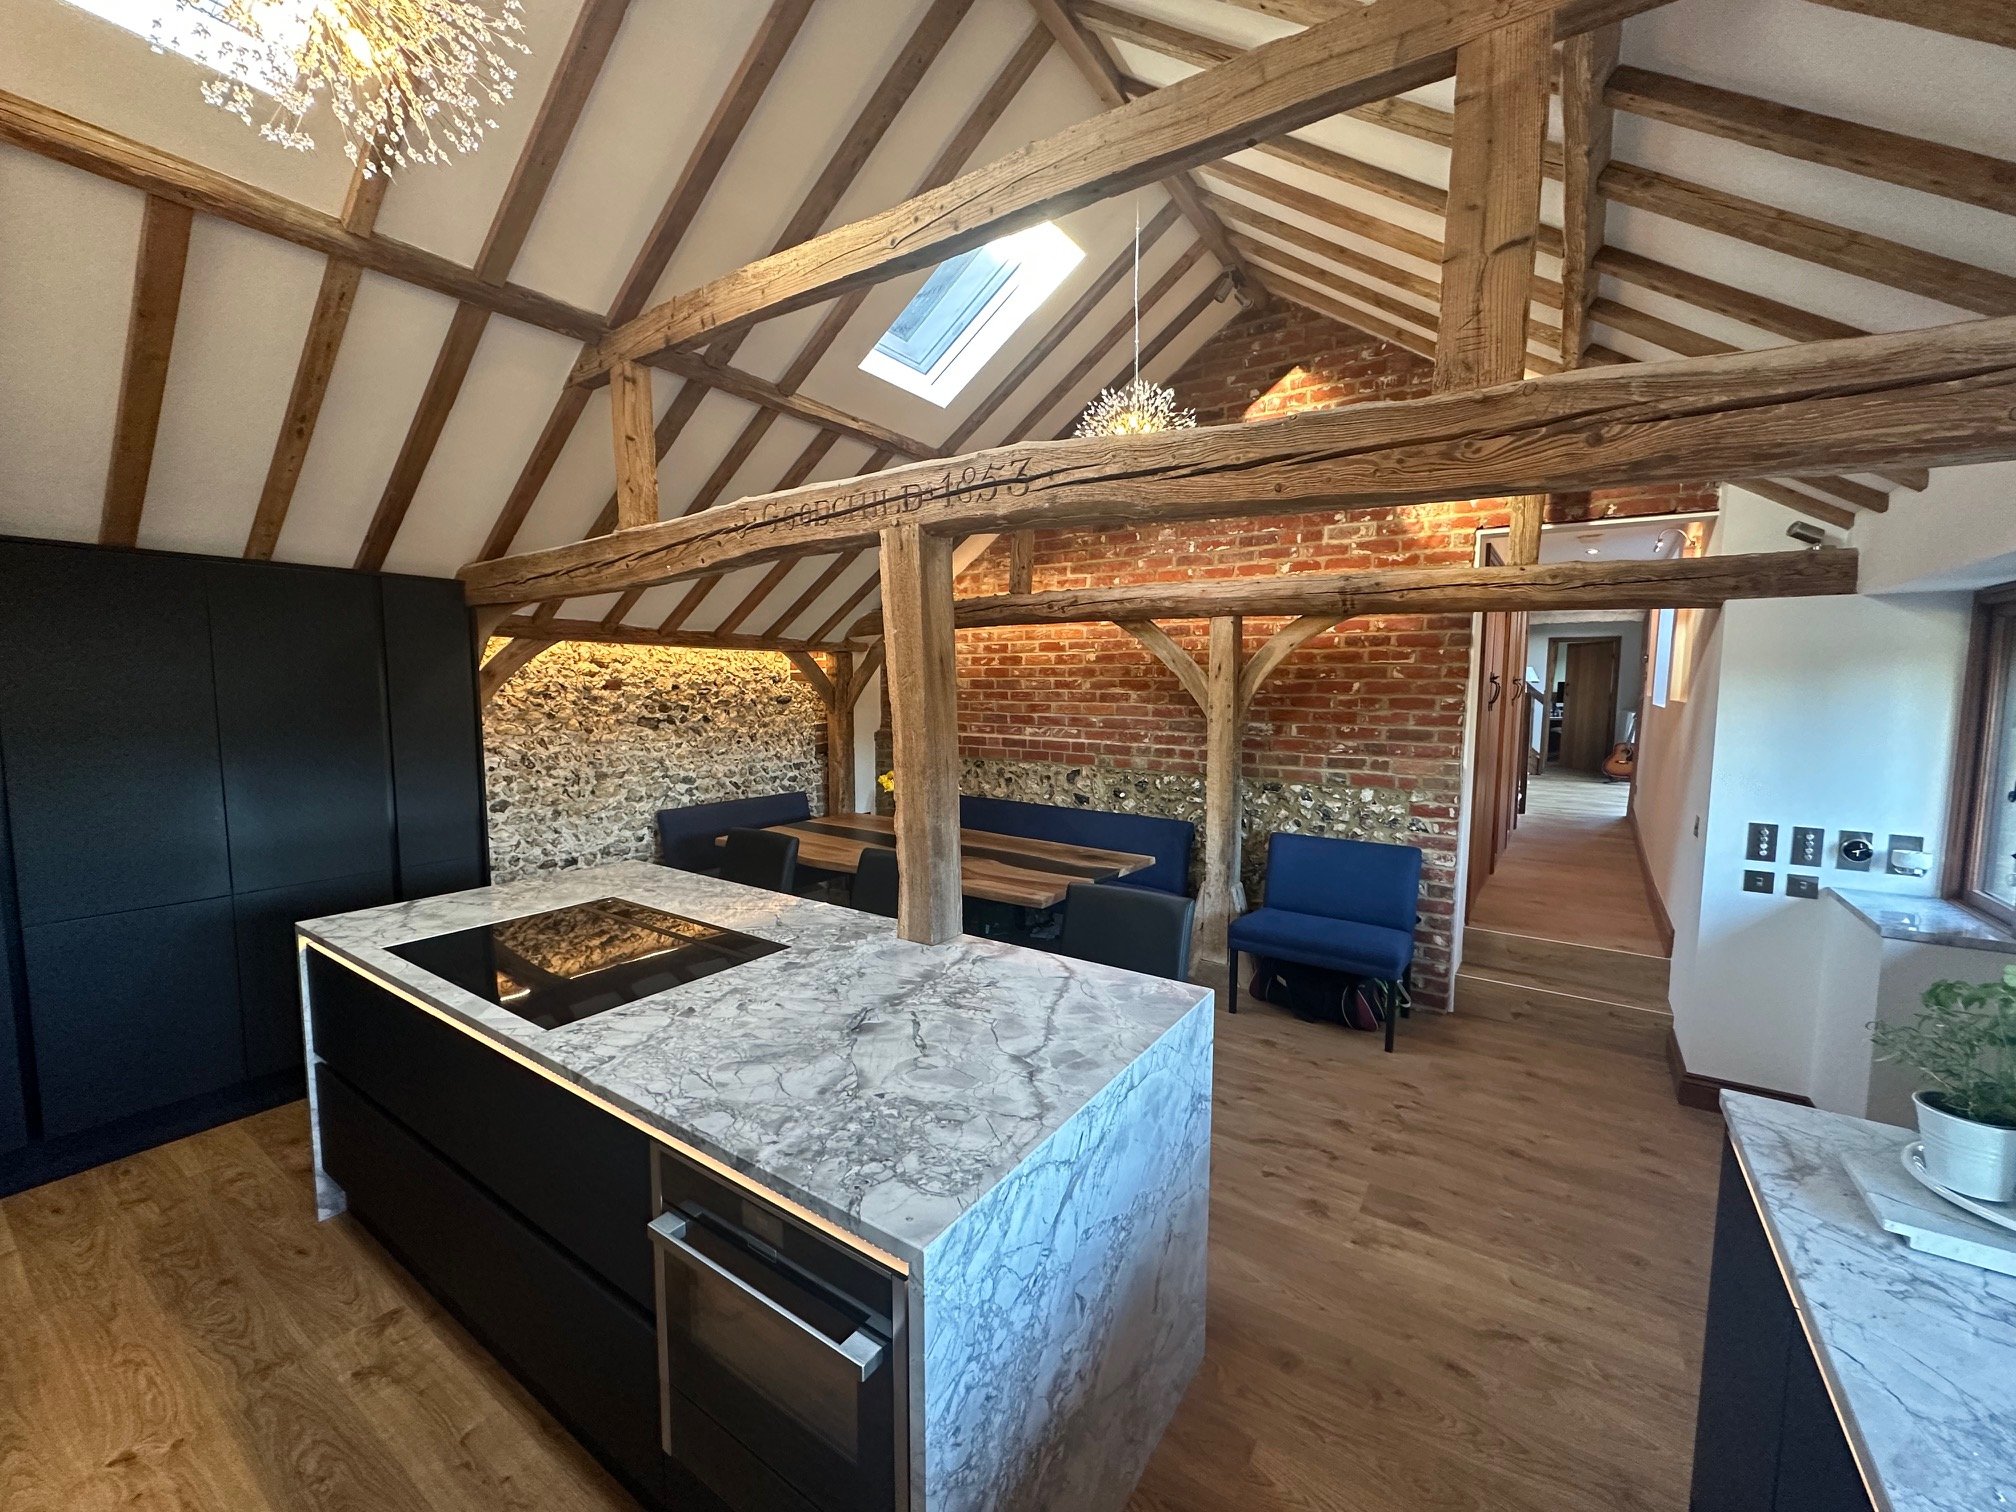 Grade II Listed building conversion and alteration